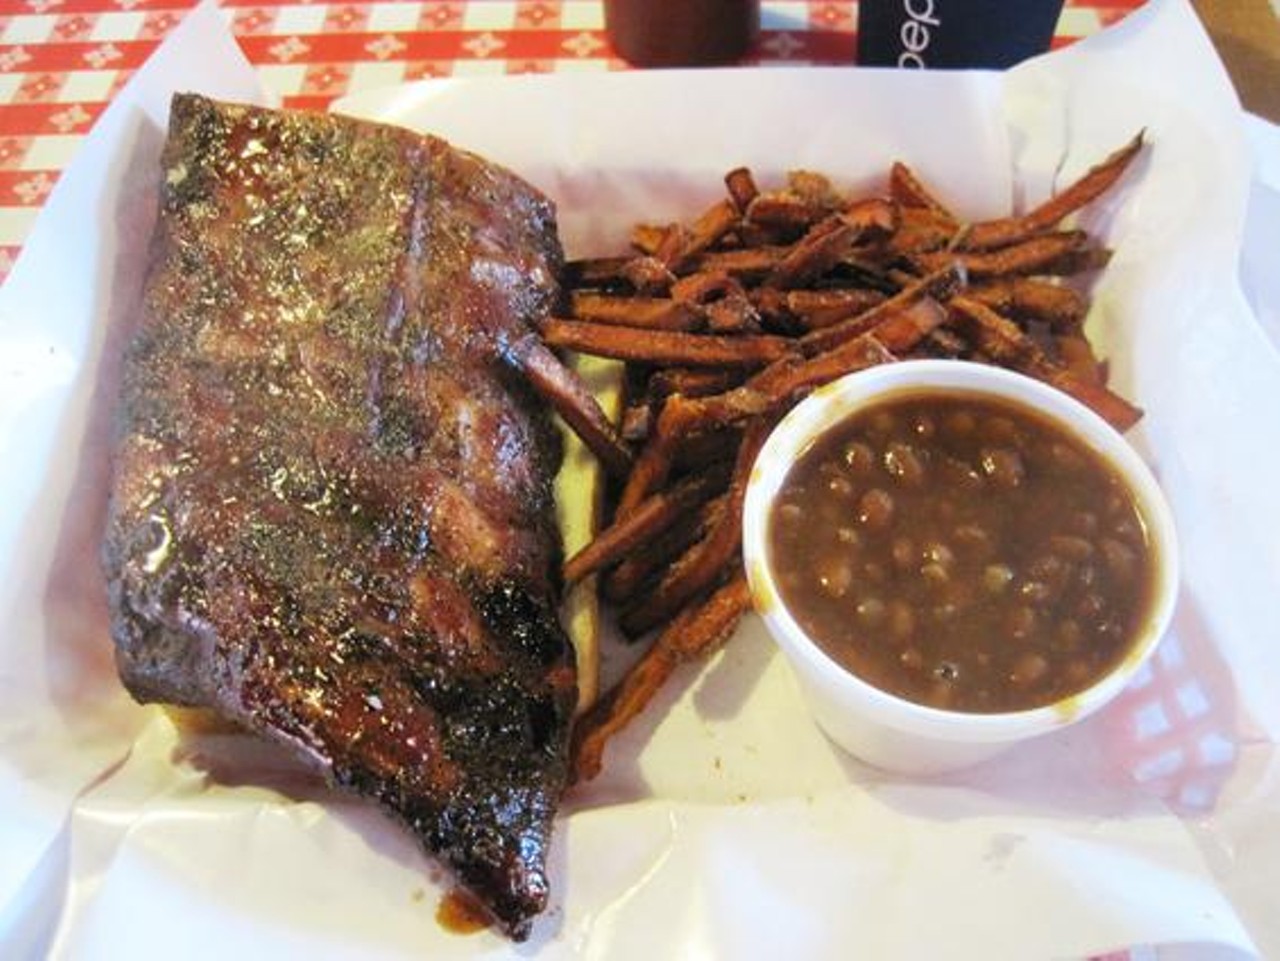 Half a slab of the ribs (with baked beans and sweet-potato fries) at Pappy's Smokehouse in St. Louis. Read more: Ian Froeb's 100 Favorite St. Louis Dishes: #4,  The Ribs at Pappy's Smokehouse